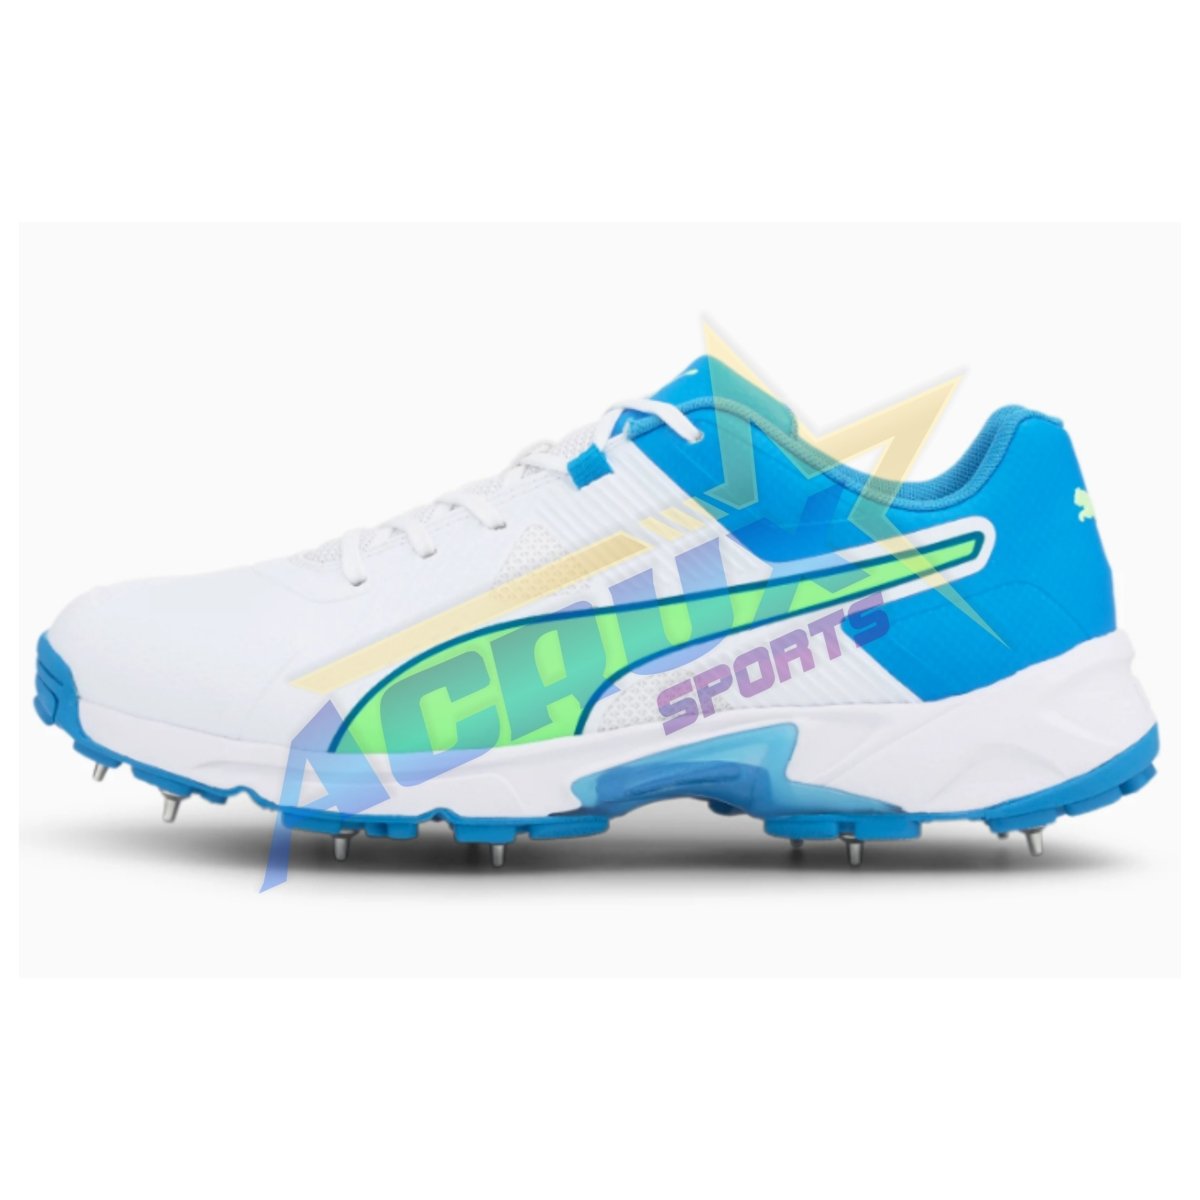 Puma One8 19.1 Cricket Shoes With Steel Spikes - White Nrgy Blue